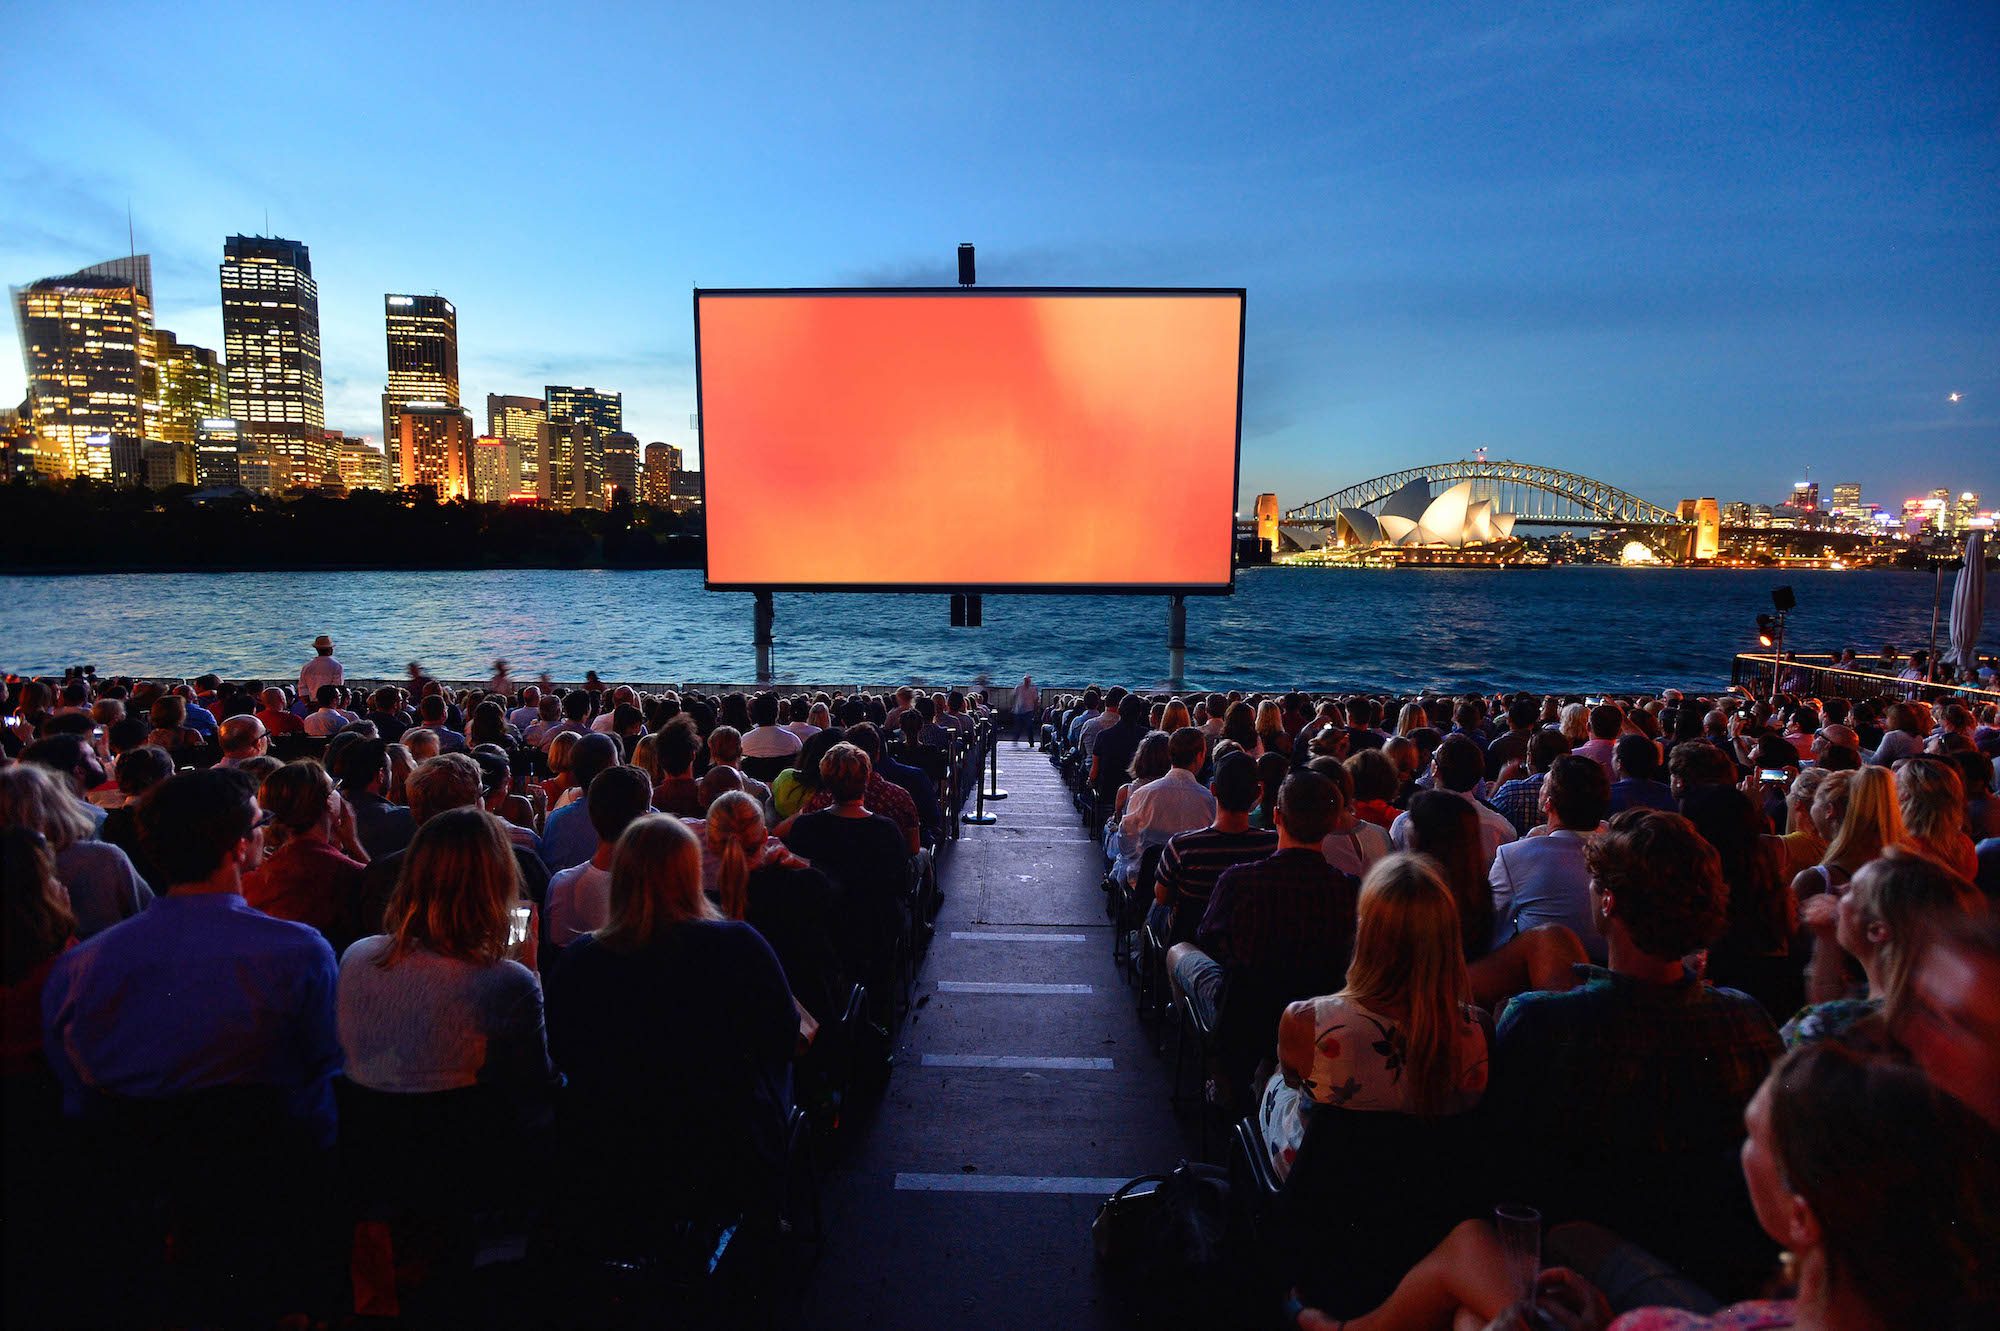 A stunning outdoor cinema is popping up in Sydney Harbour this summer